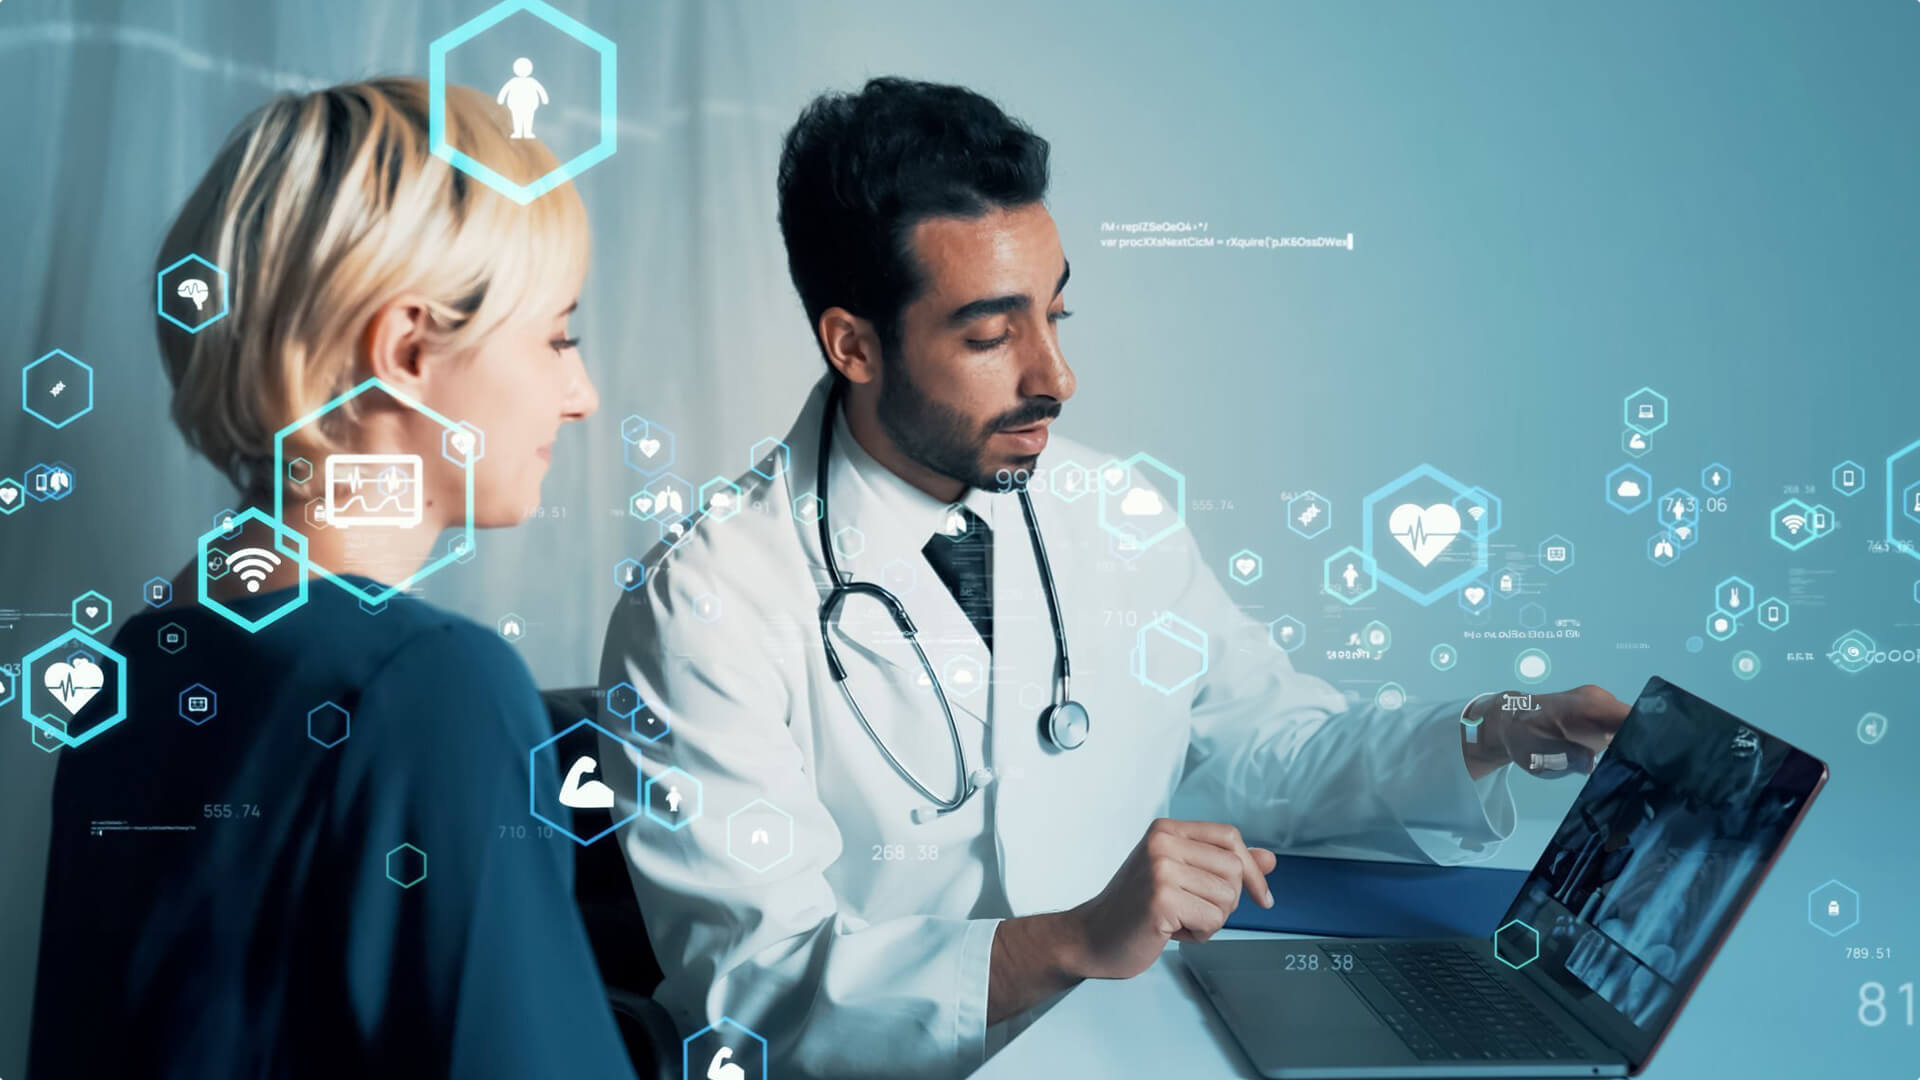 A male doctor and a female healthcare professional looking at an X-ray displayed on a laptop, with futuristic digital healthcare and medical icons floating in the foreground, symbolizing advanced medical technology and patient care data analytics.